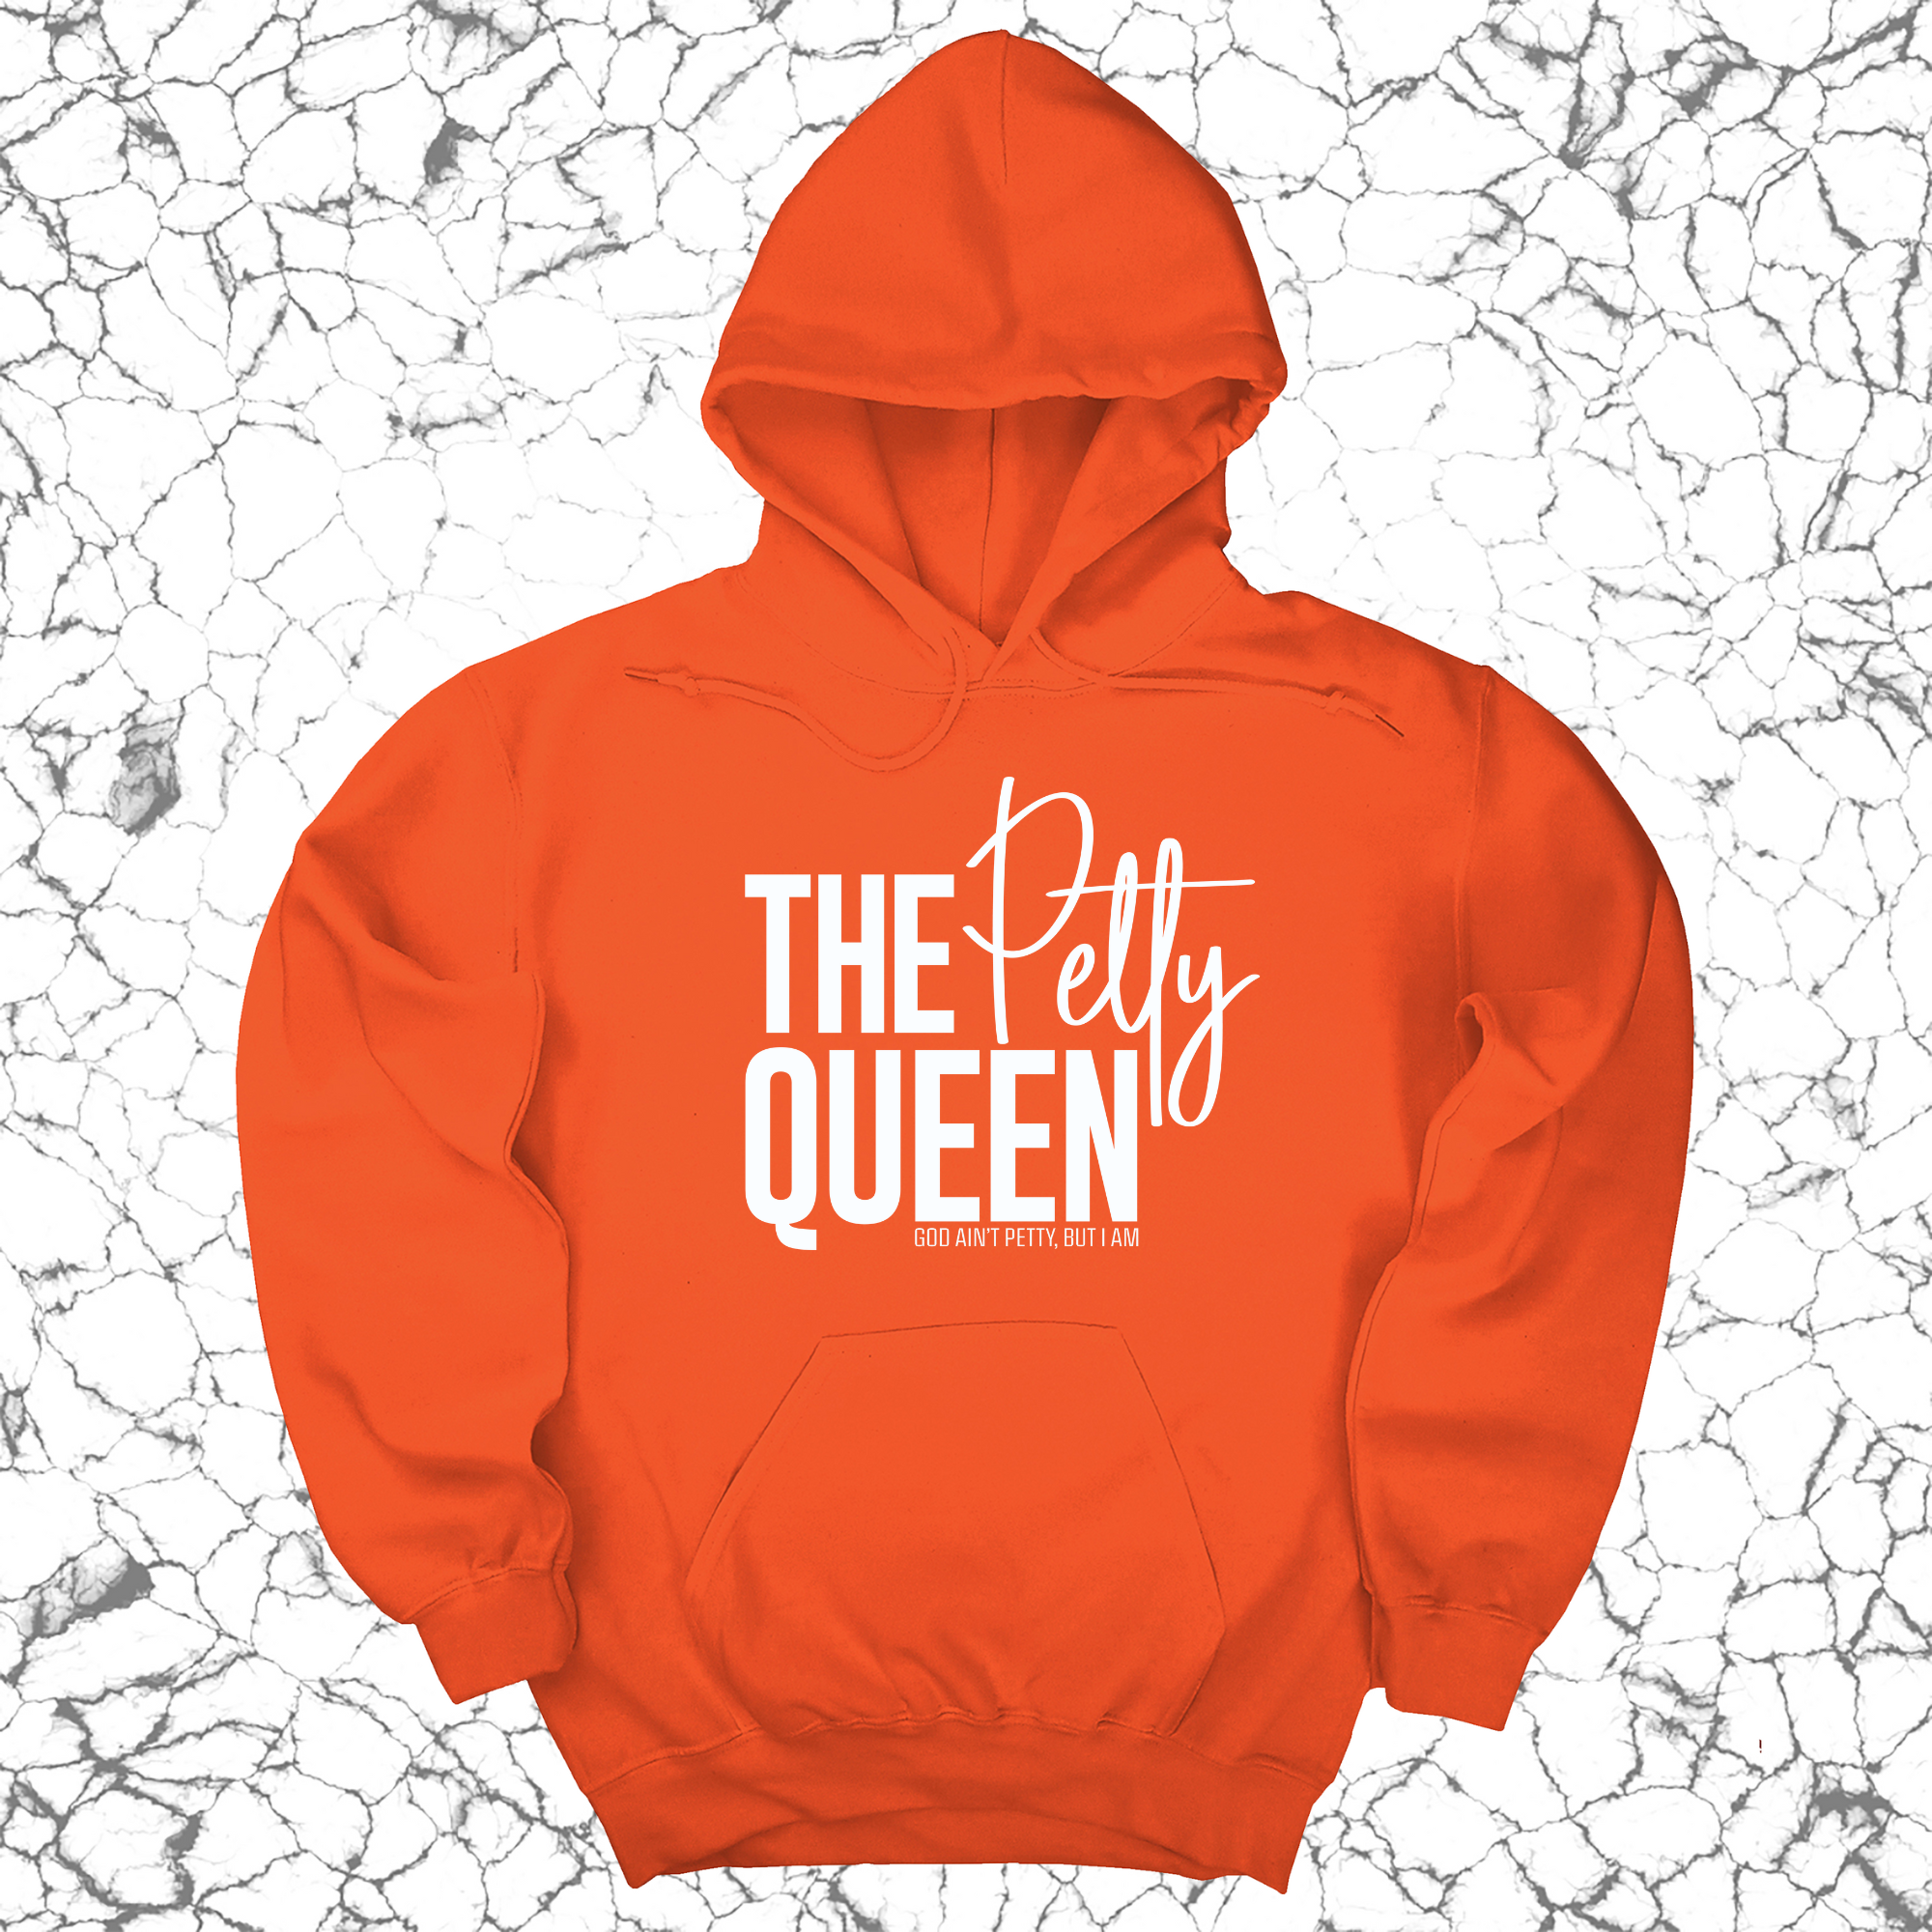 The Petty Queen Unisex Hoodie-Hoodie-The Original God Ain't Petty But I Am